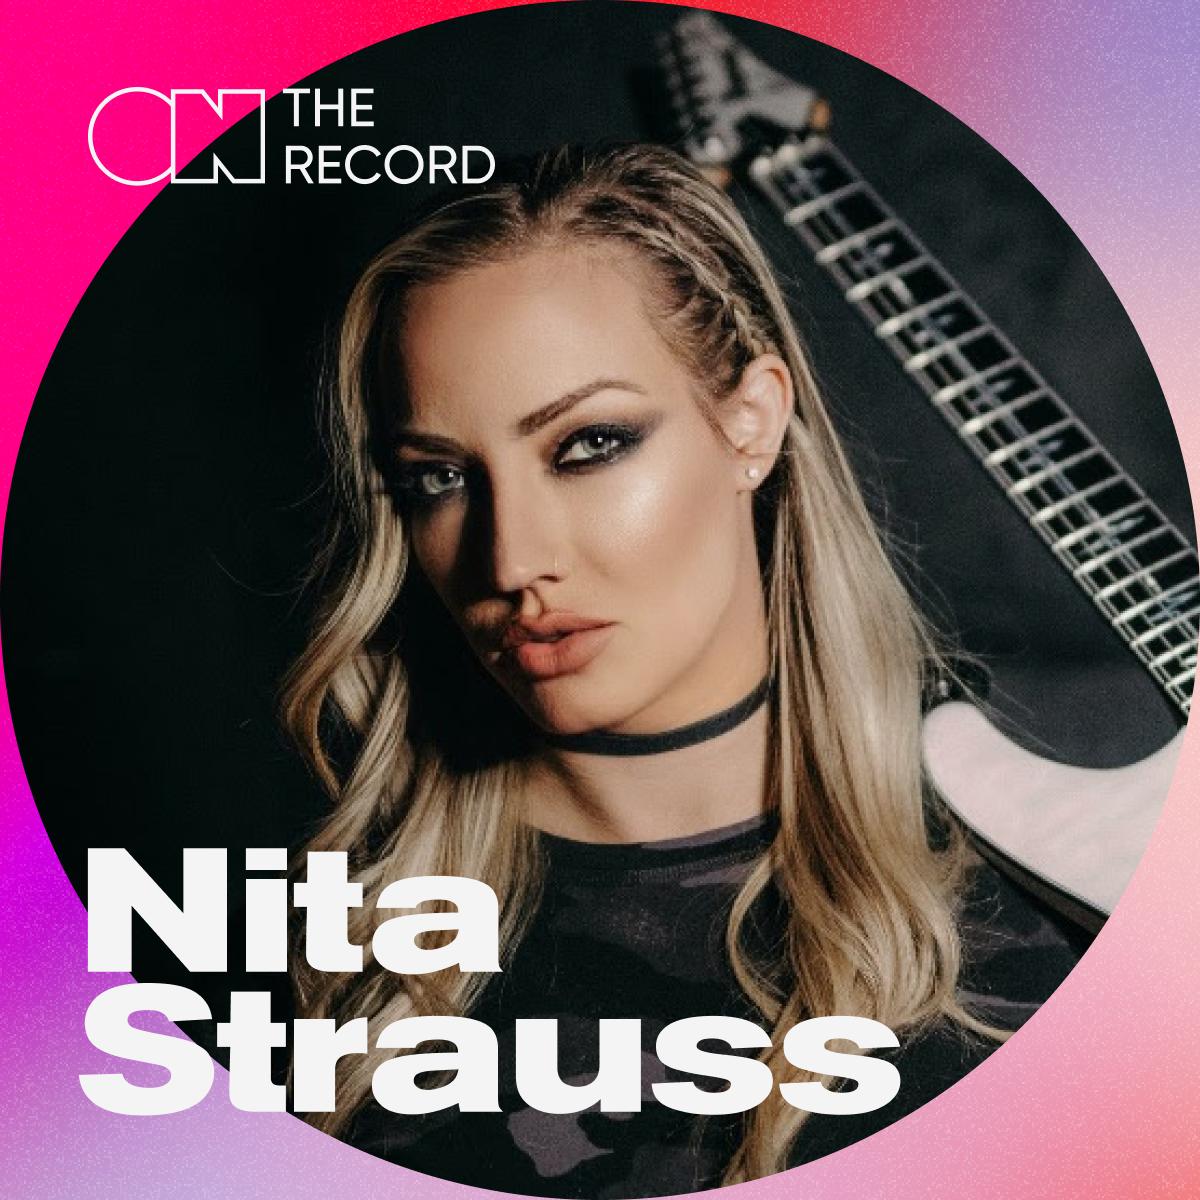 On The Record: Nita Strauss on albums, auditions & Alice Cooper